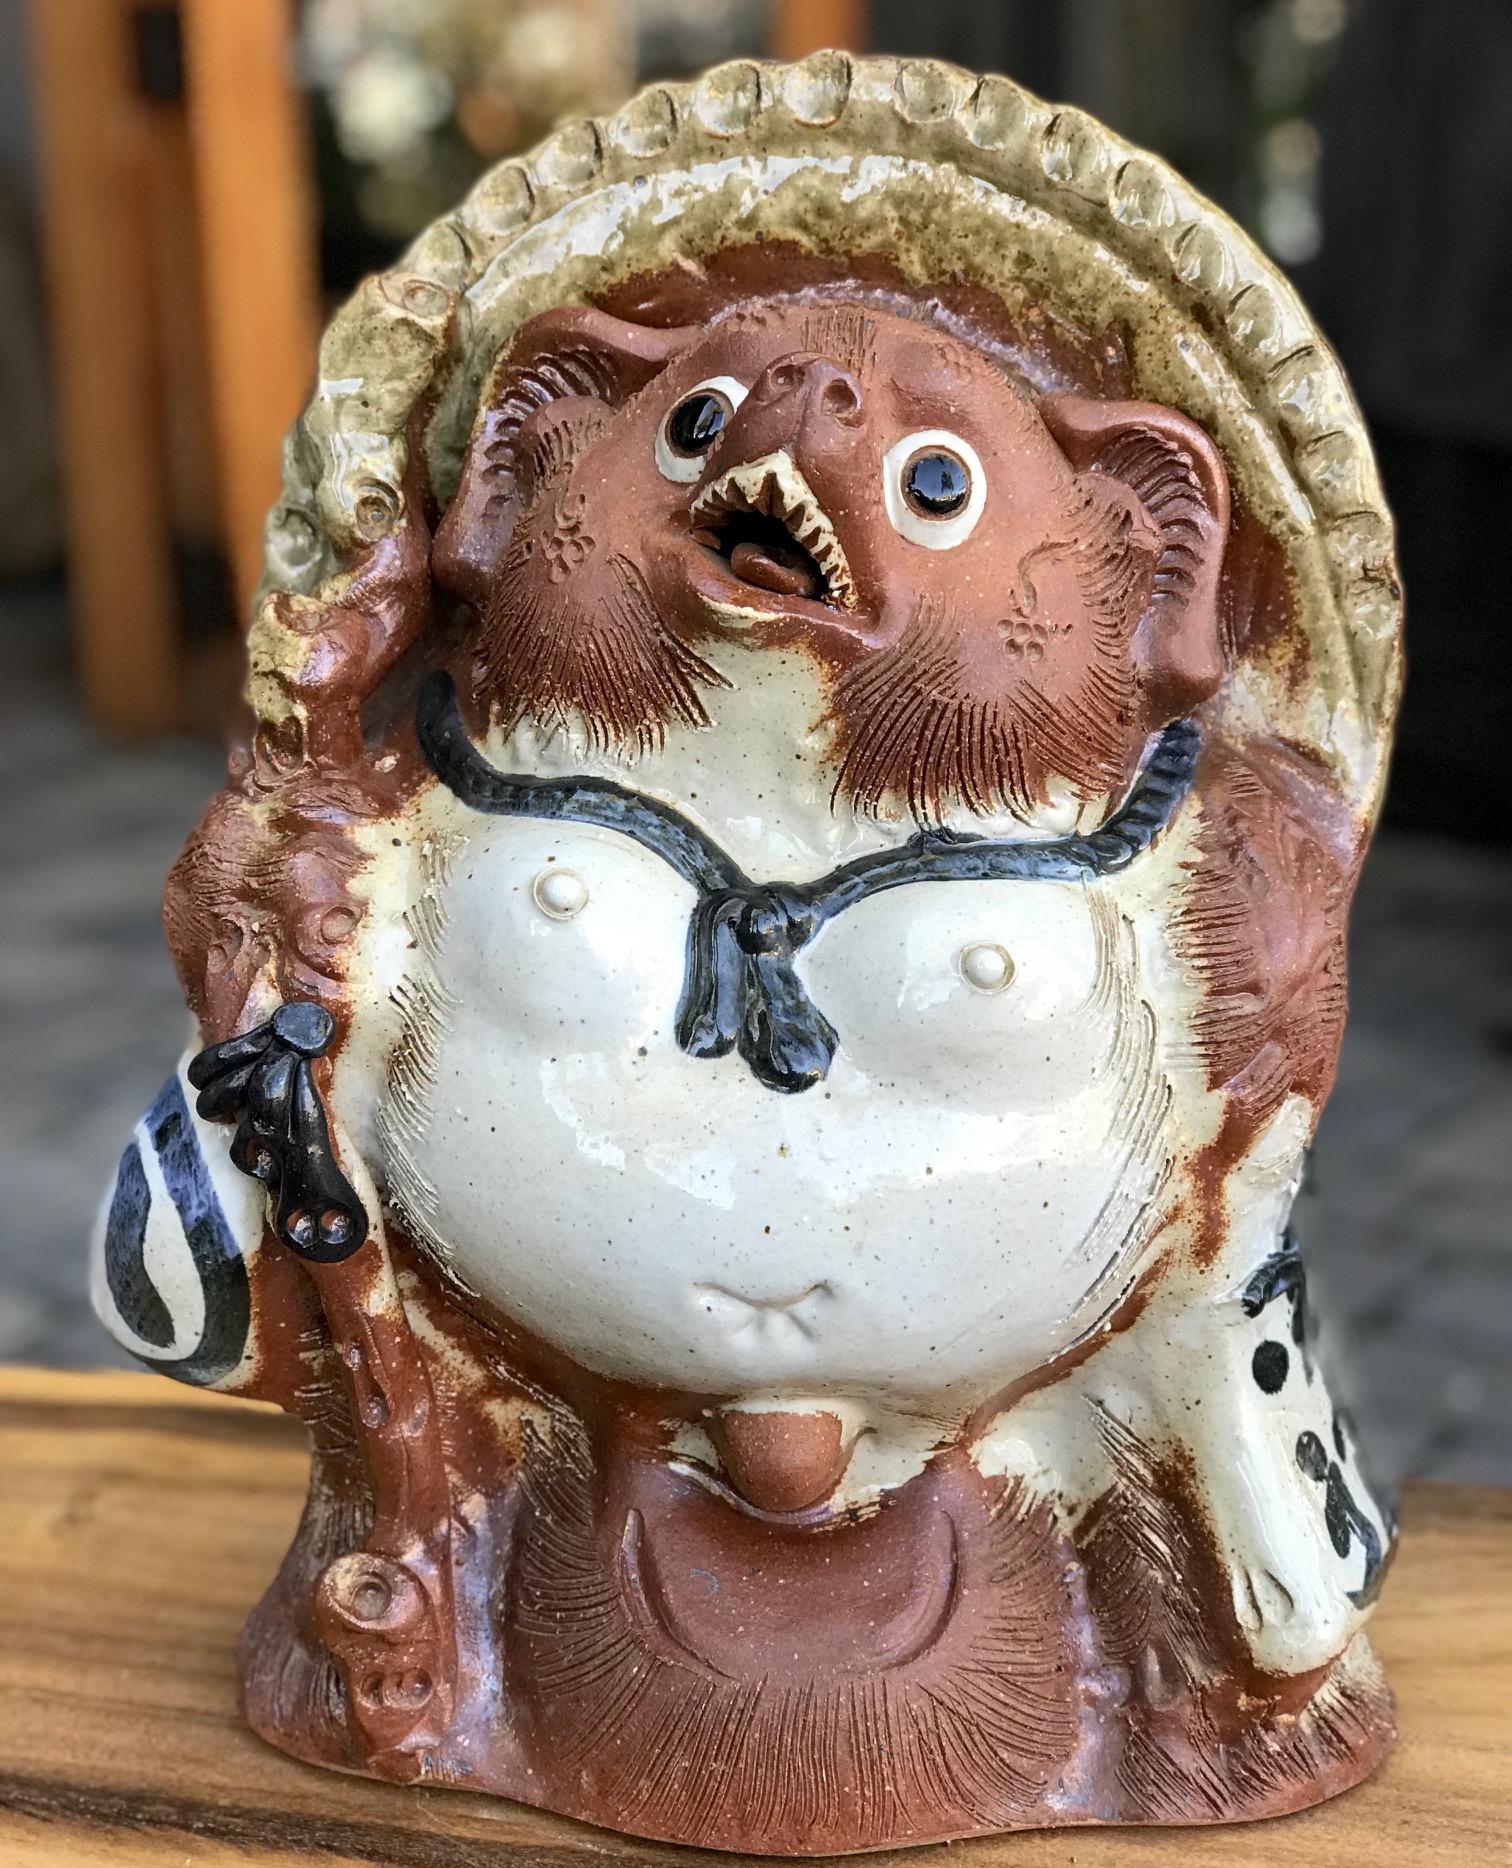 Tanuki 狸 – The Shape-shifting Prankster Icon of Wealth and Generosity